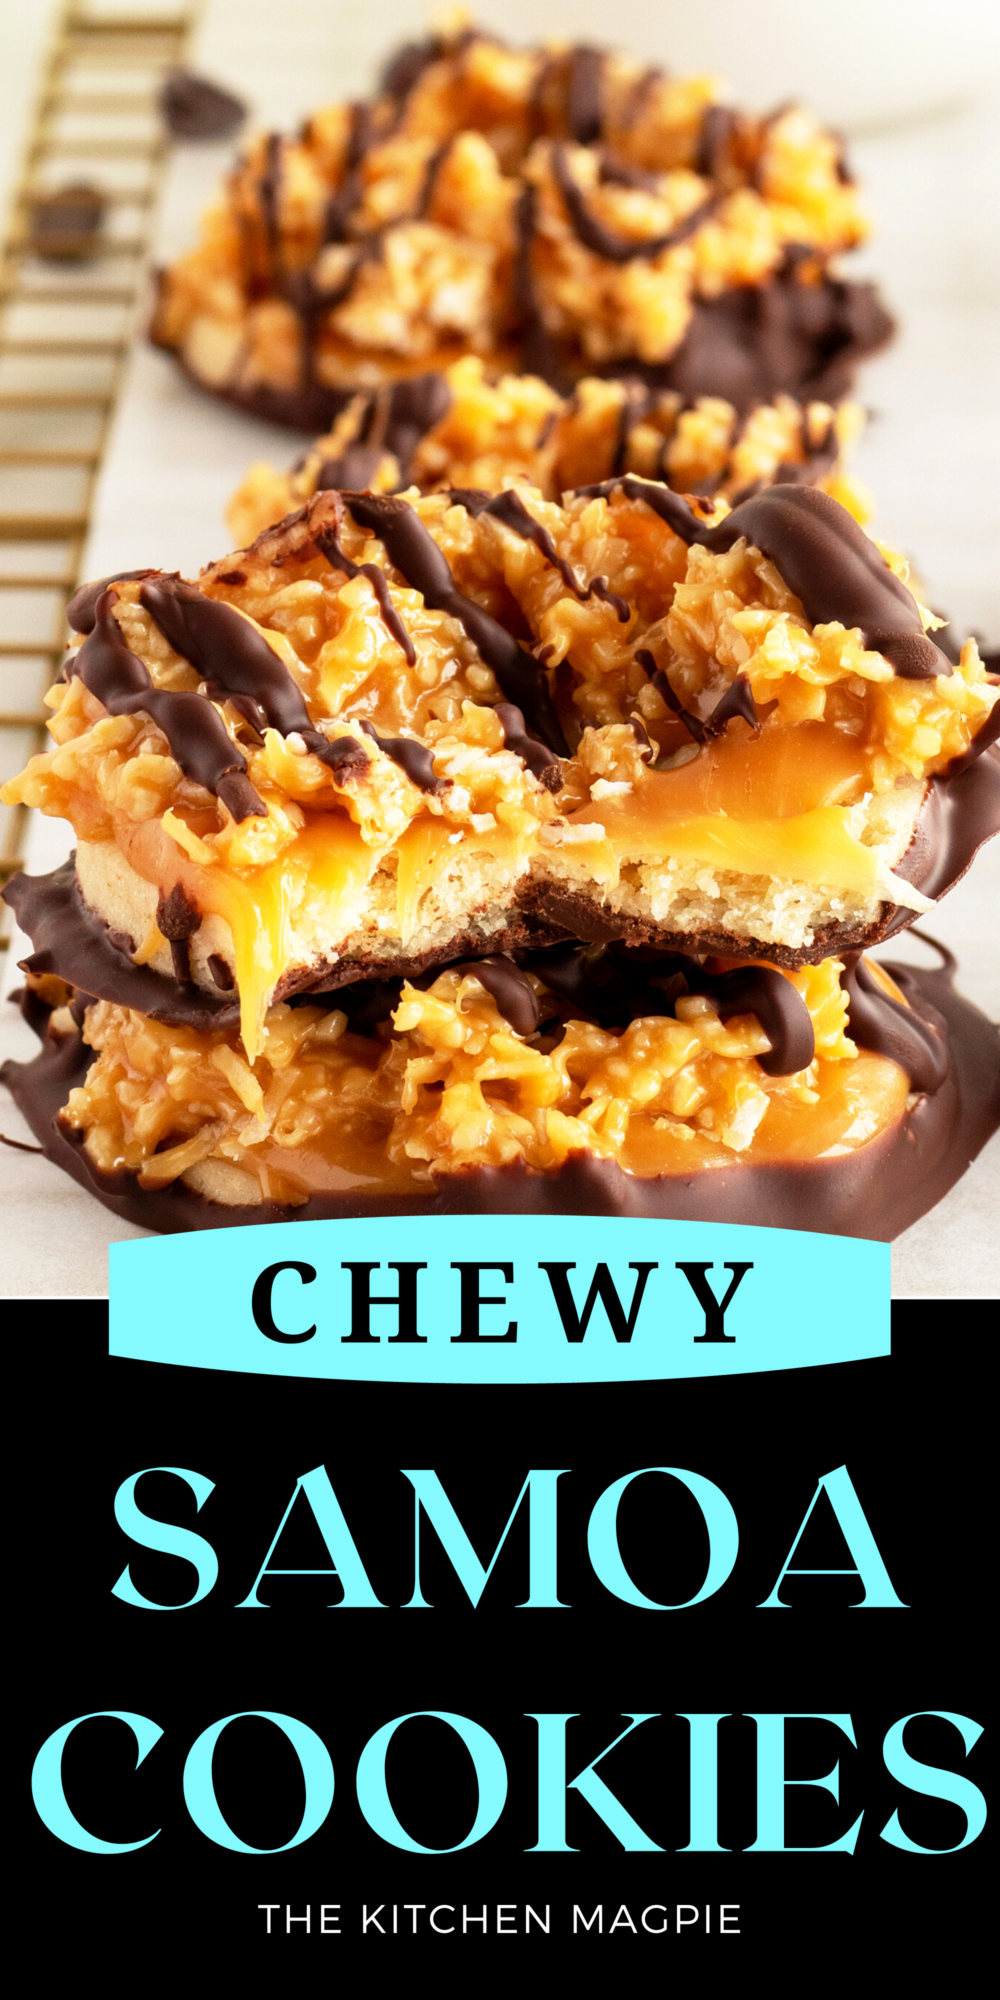 Samoa cookies are a buttery, almost crumbly cookie with soft chewy caramel coconut topping and a wonderful rich chocolate drizzle.